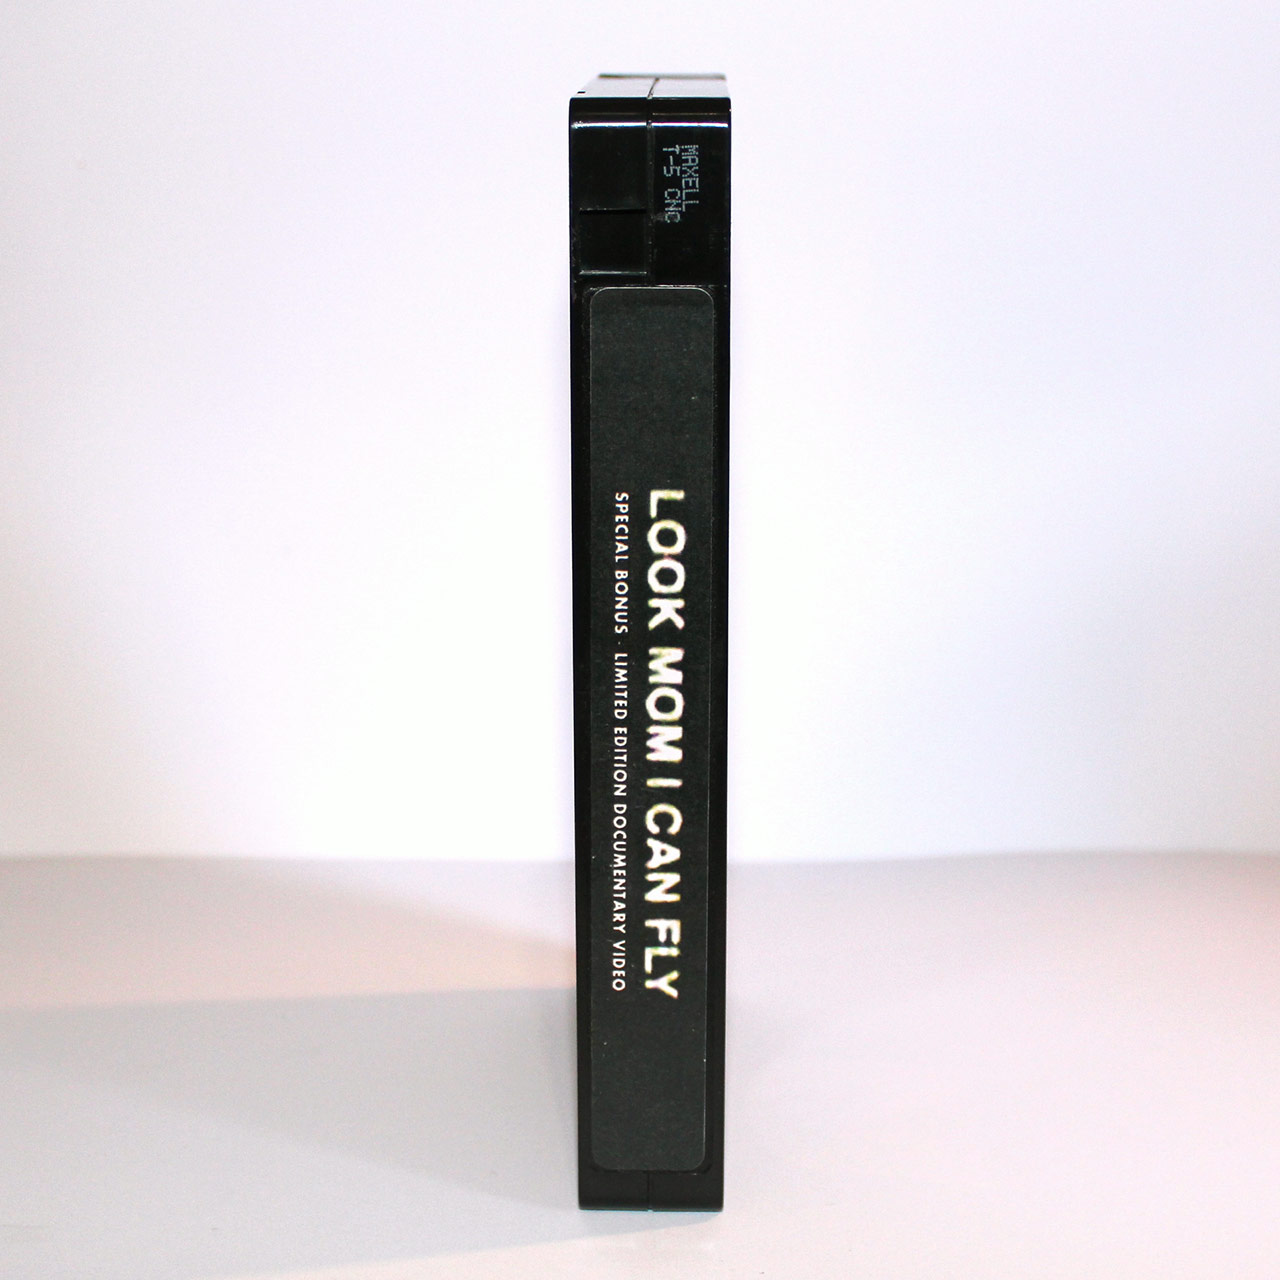 Printed full colour VHS spine labels